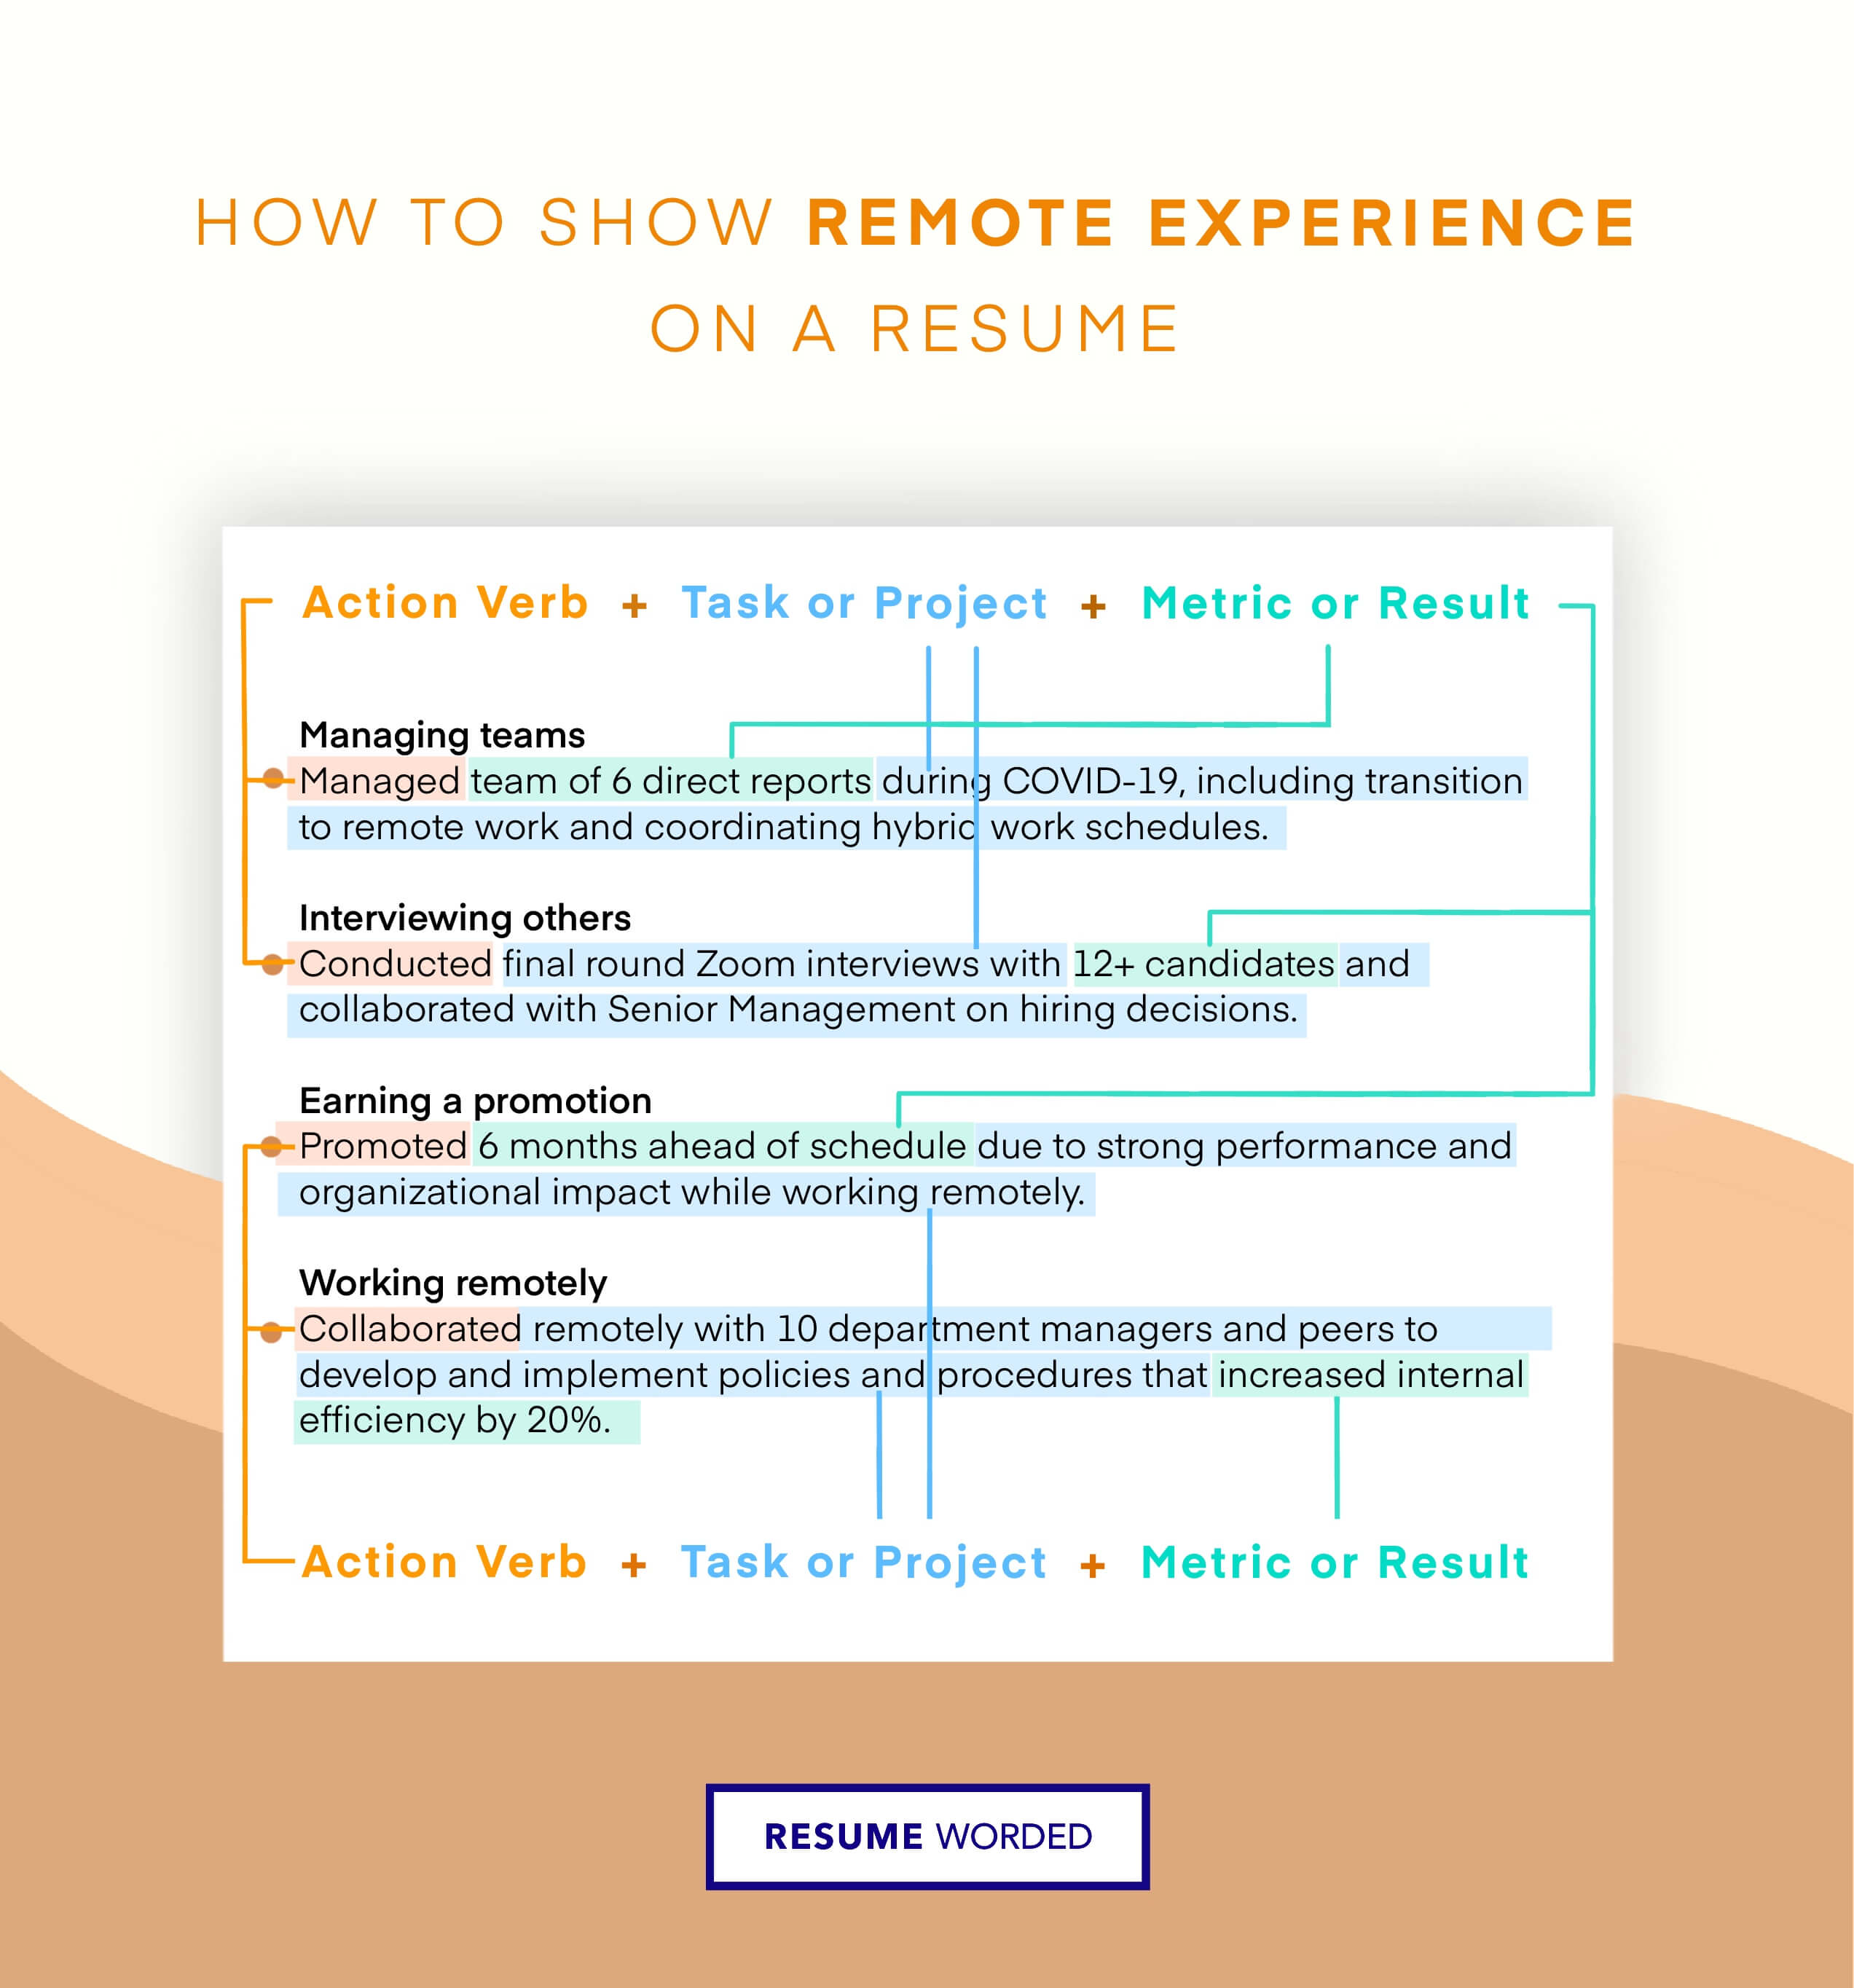 Emphasize experience with remote teams - Vice President of Human Resources CV